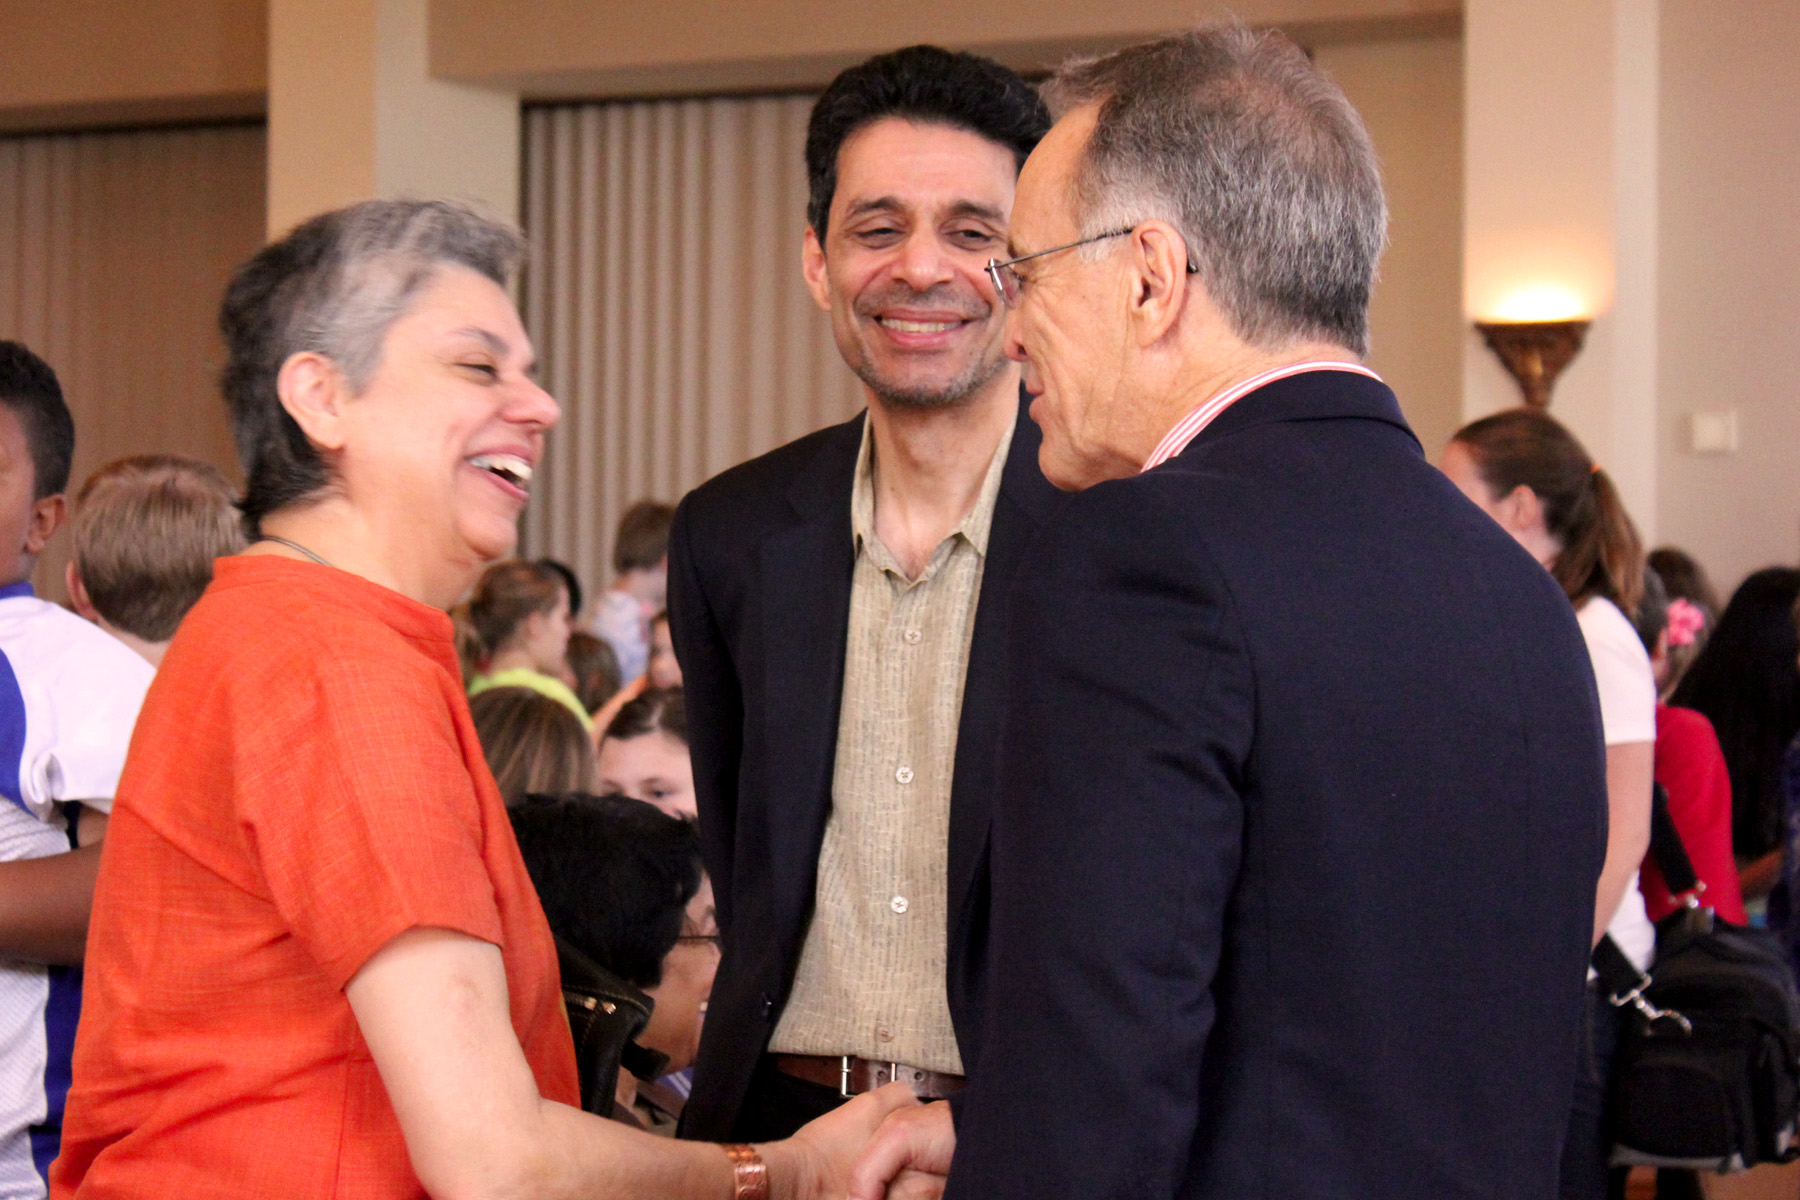 From left to right, Freny Mistry, Rohinton Mistry, and WLT executive director RC Davis-Undiano. Photo by Jen Rickard.